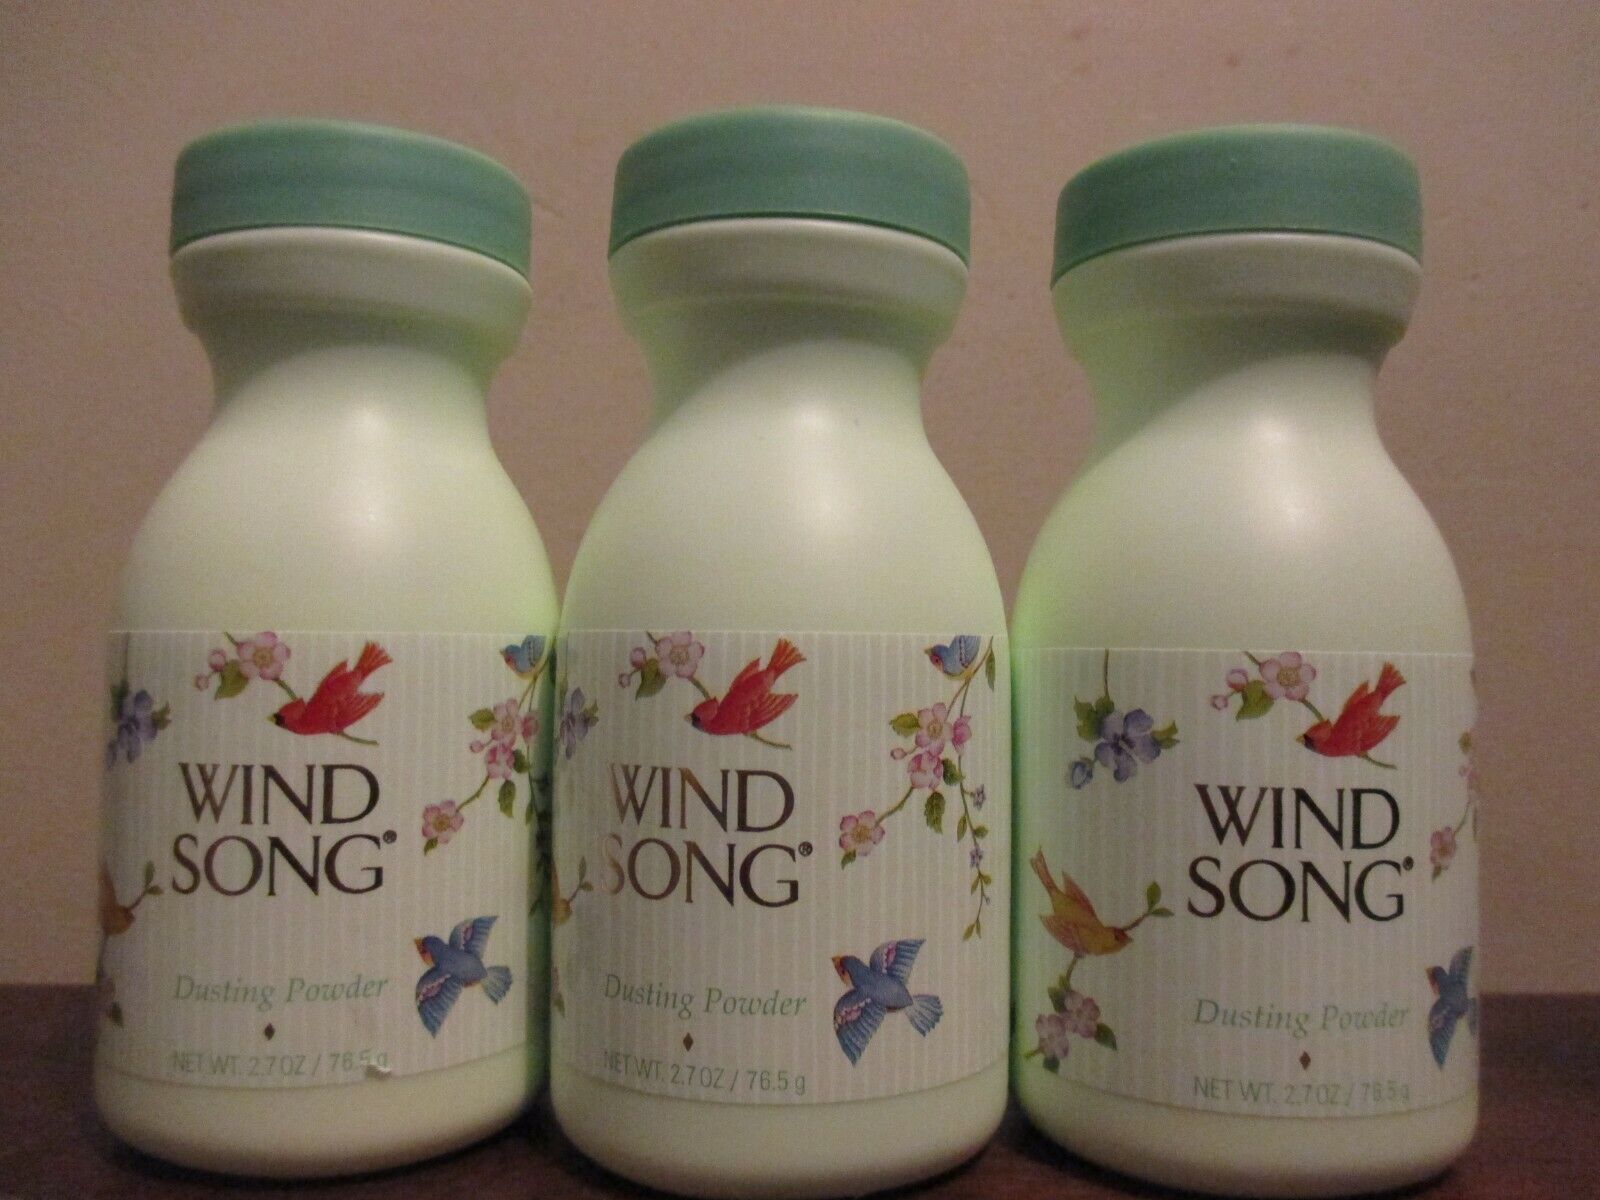 Lot of 3 Wind Song by Prince Matchabelli Dusting Powder 2.7 oz